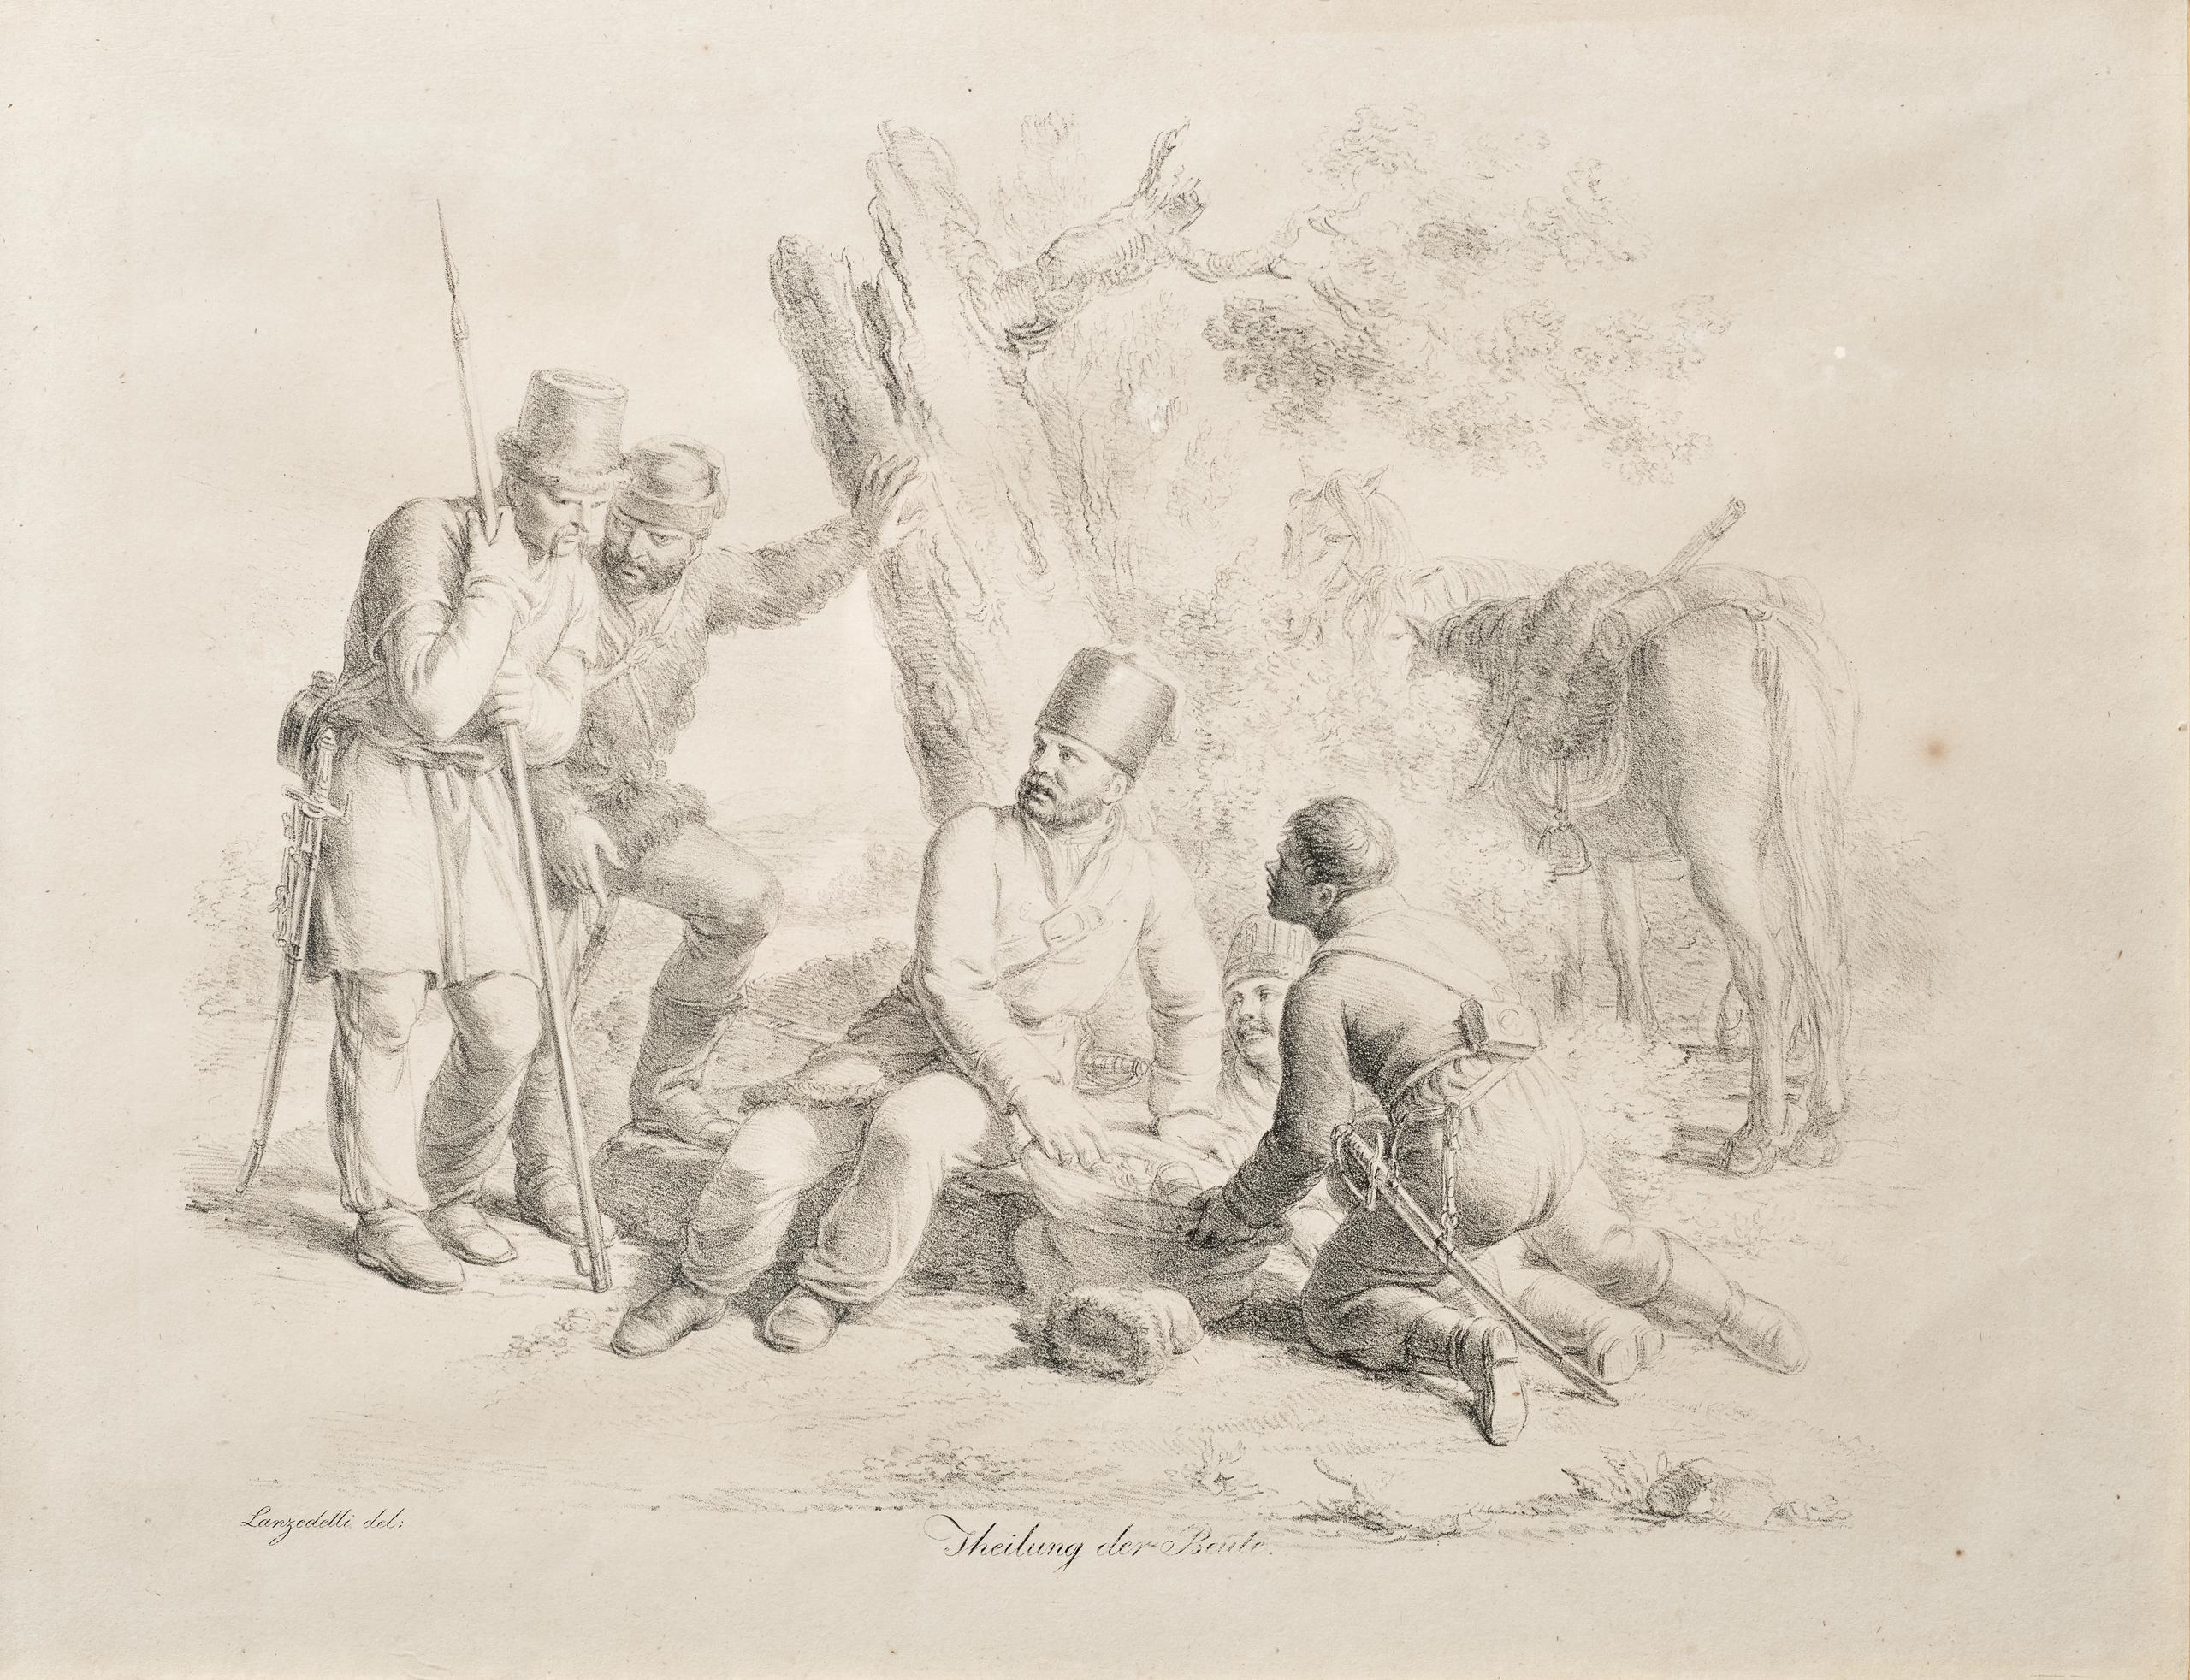 The life of the Cossacks by Josef Lanzedelli, 1820s